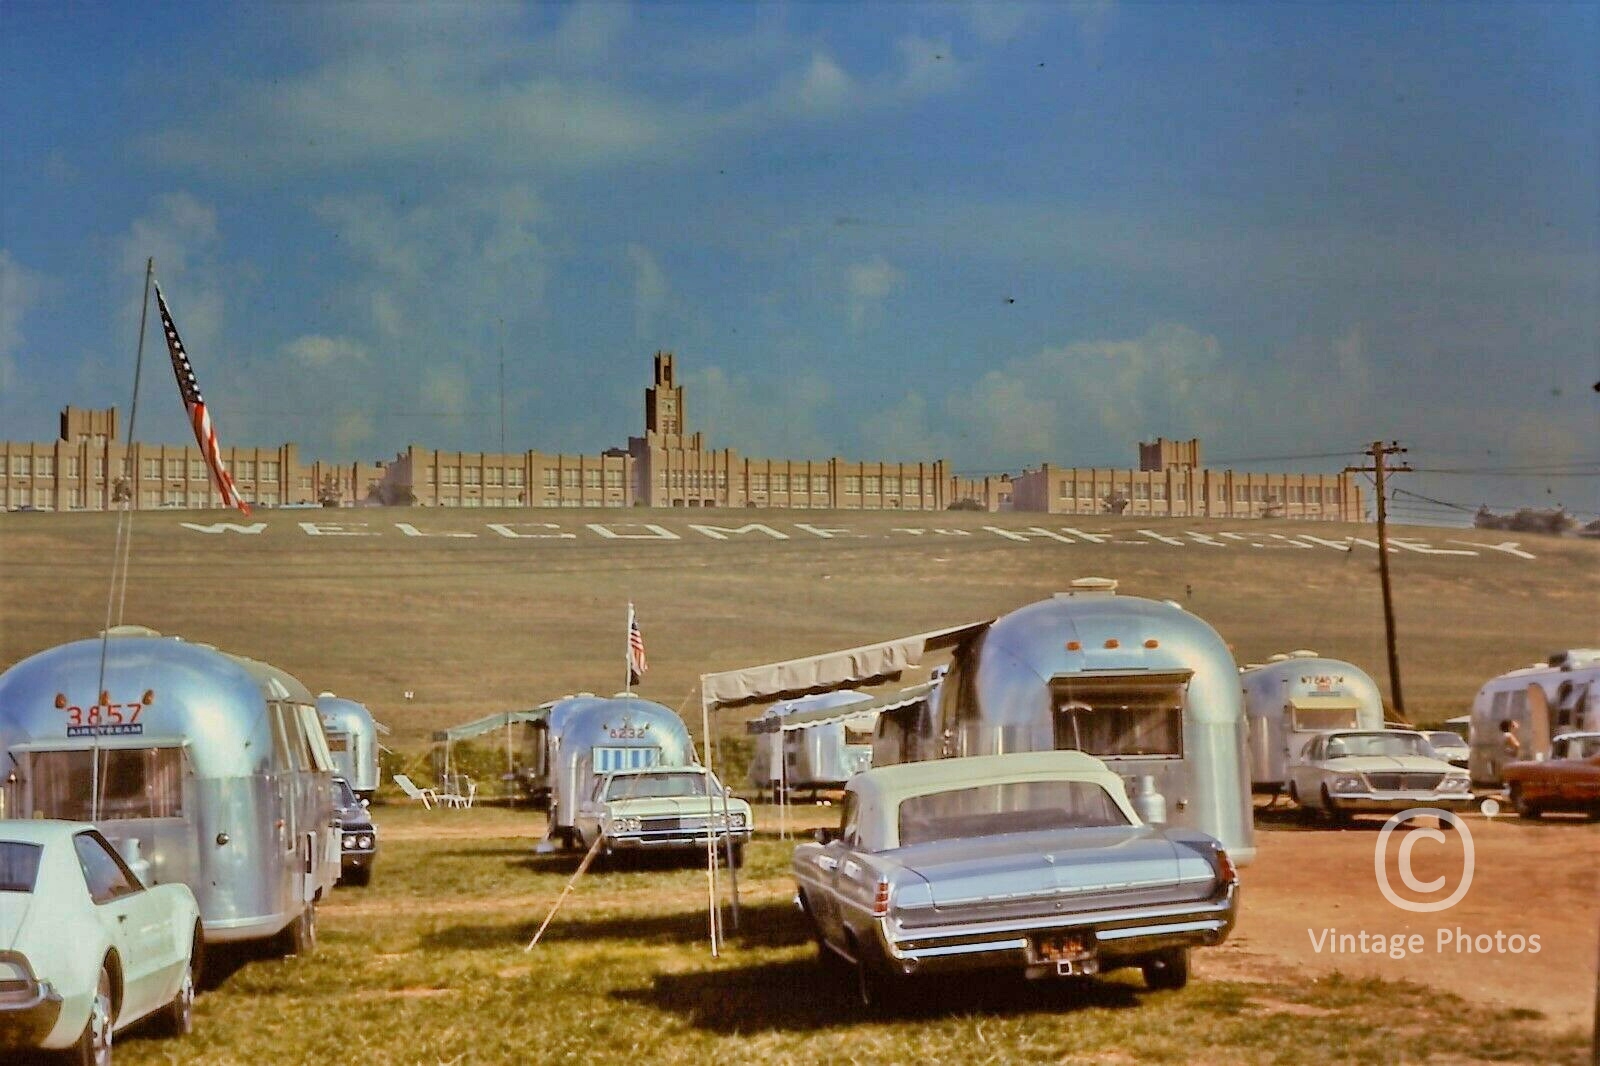 1960s Classic Airstream Trailers, Welcome to Hershey